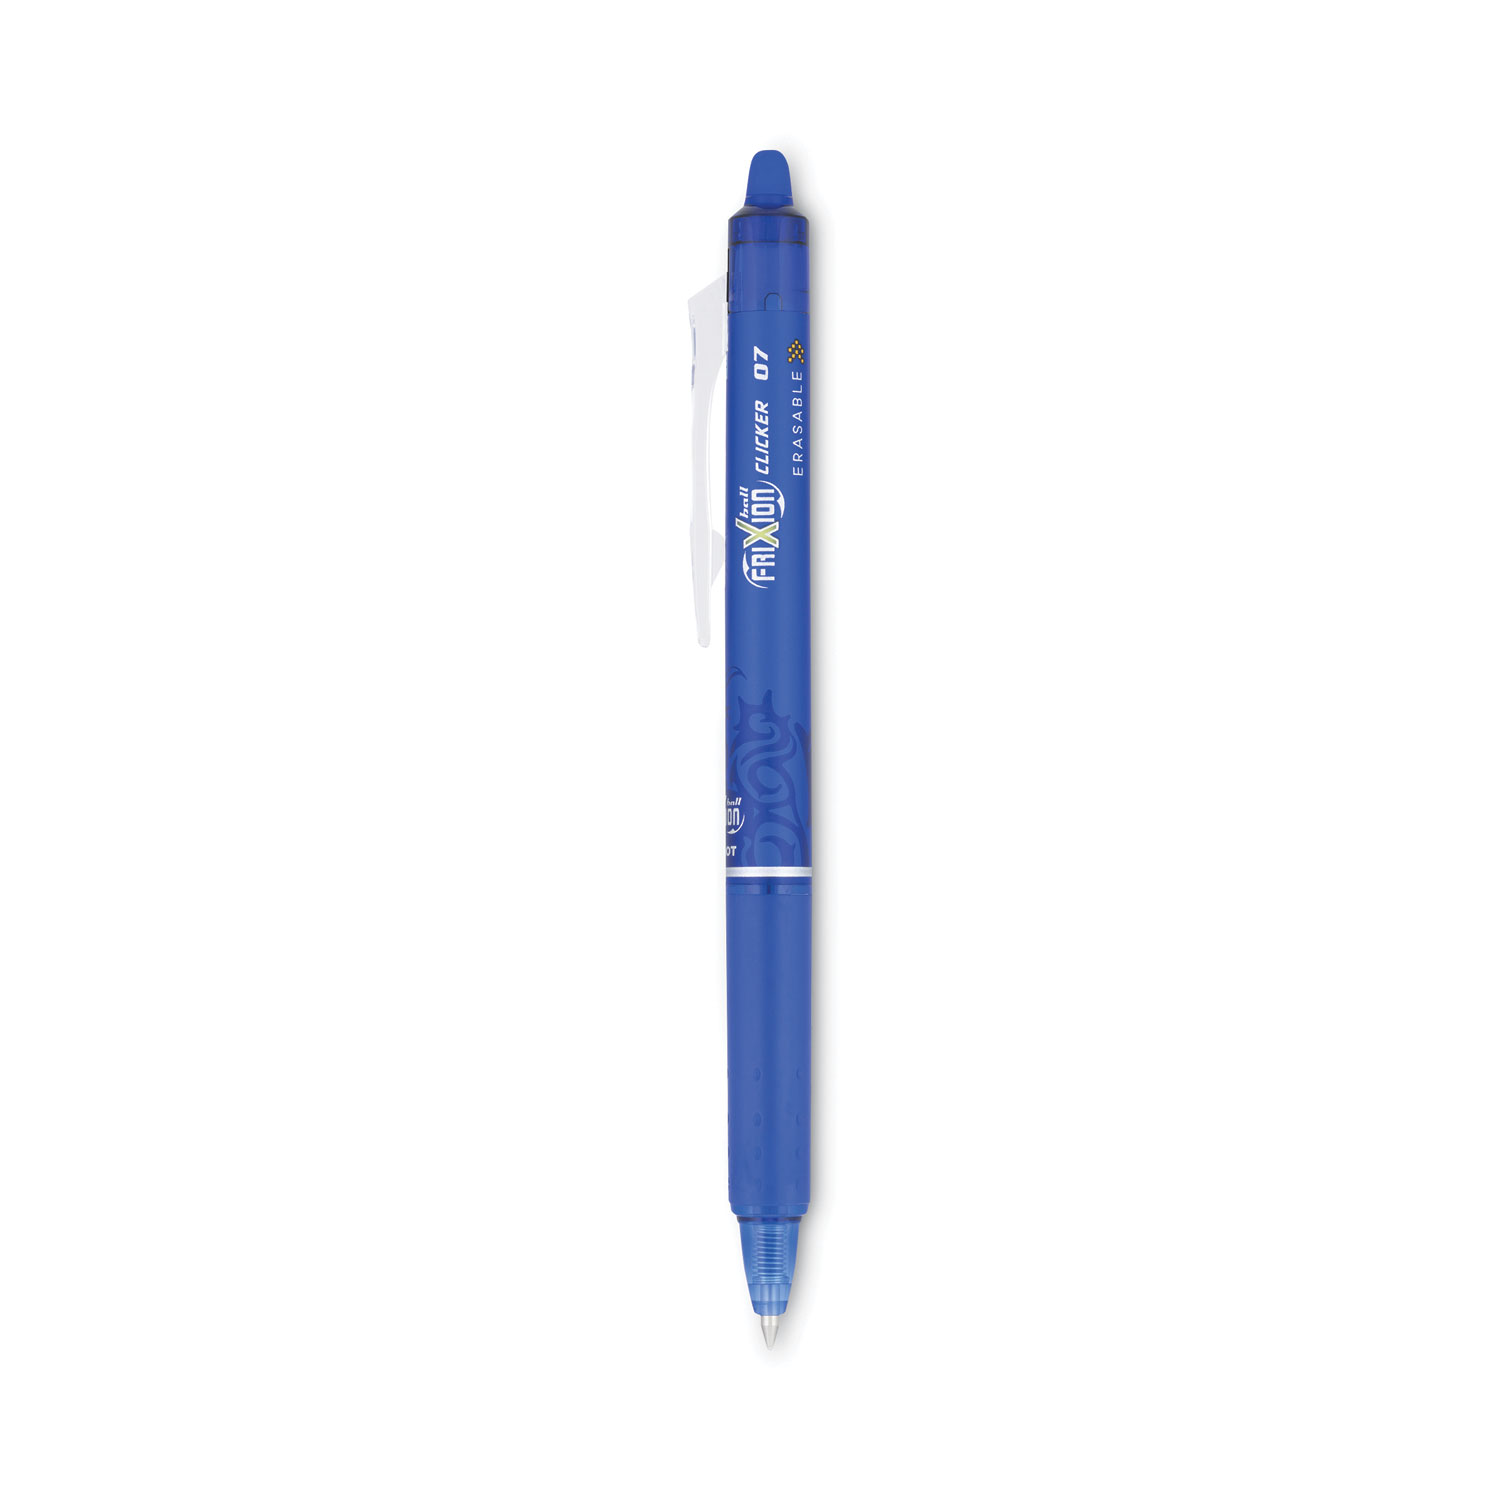  Pilot, FriXion Clicker Erasable Gel Pens, Fine Point 0.7 mm,  Pack of 12, Blue : Office Products